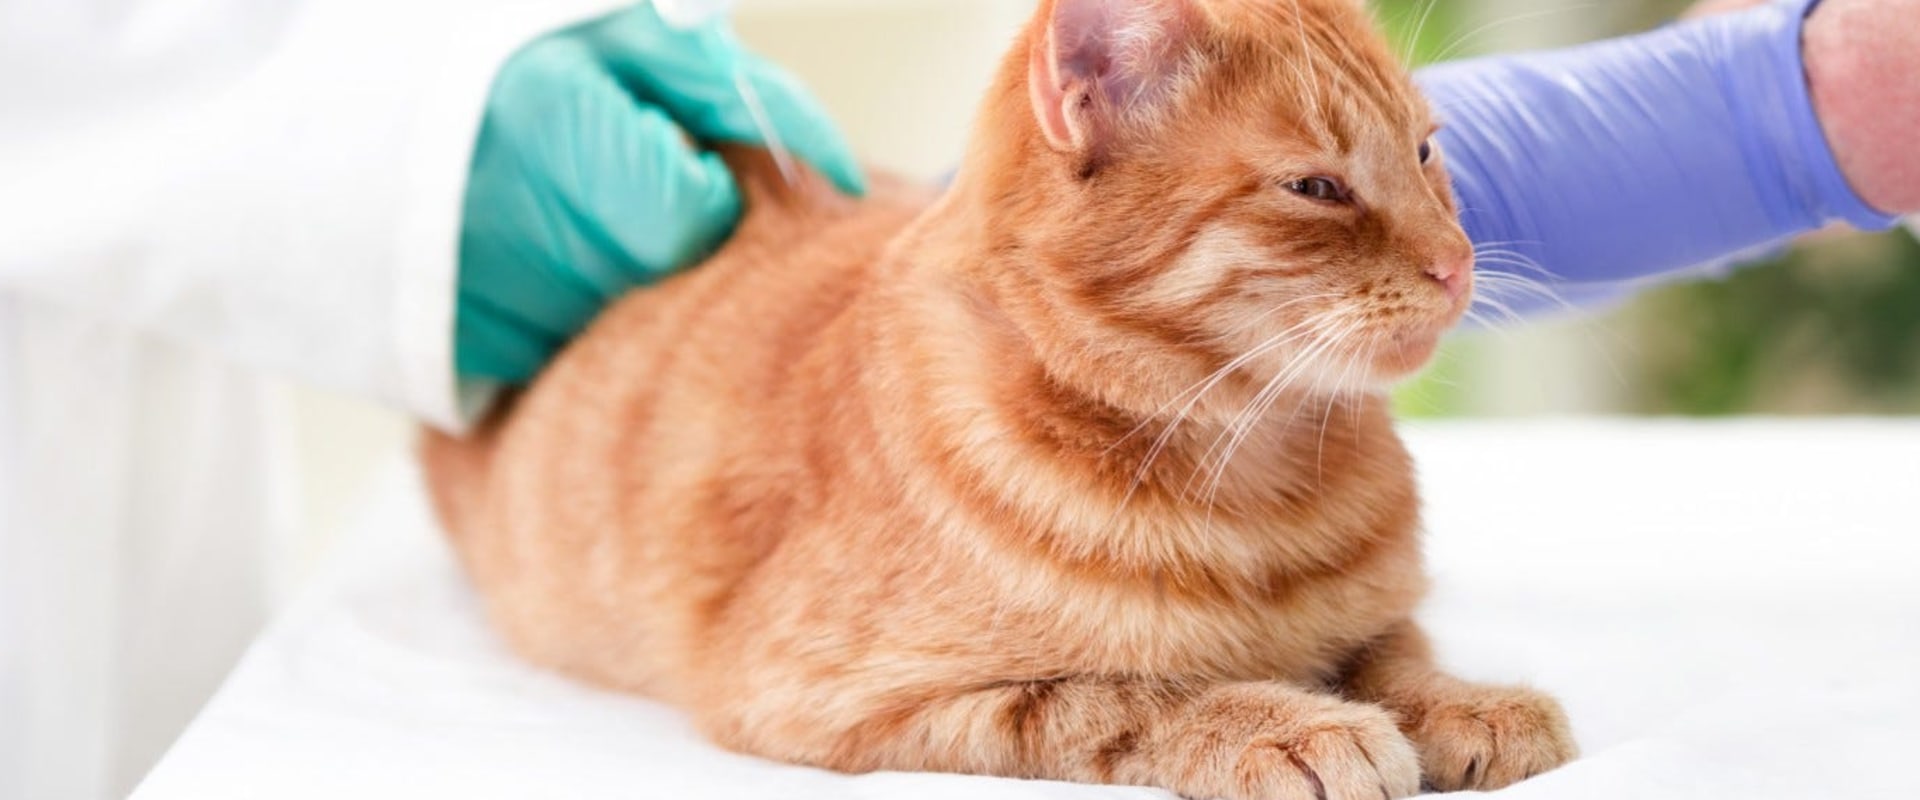 How often should i take my cat to the vet?